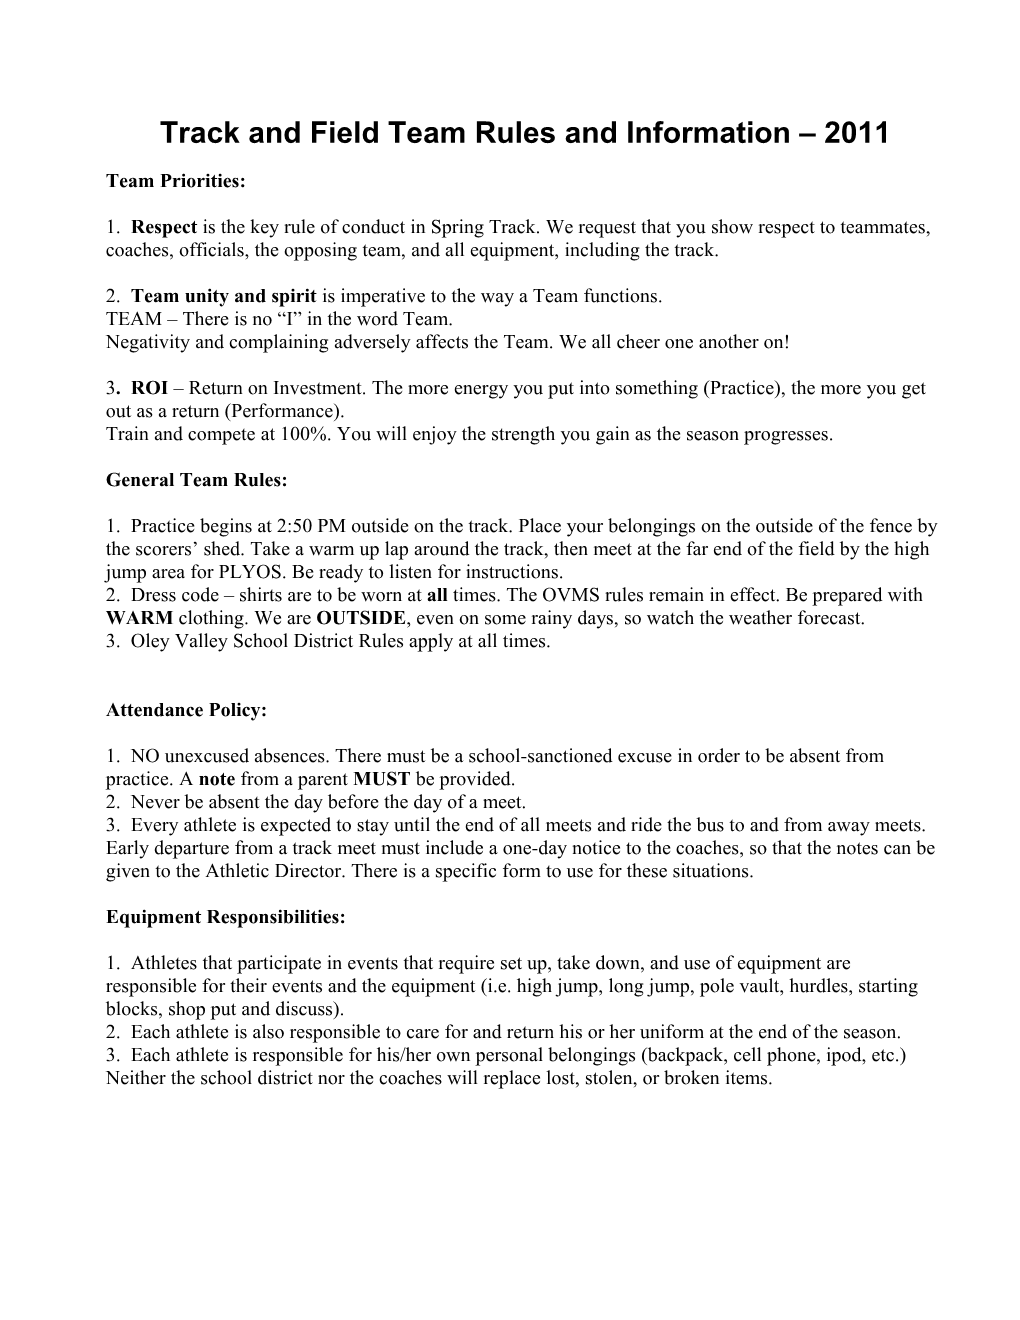 Track and Field Team Rules and Information 2009